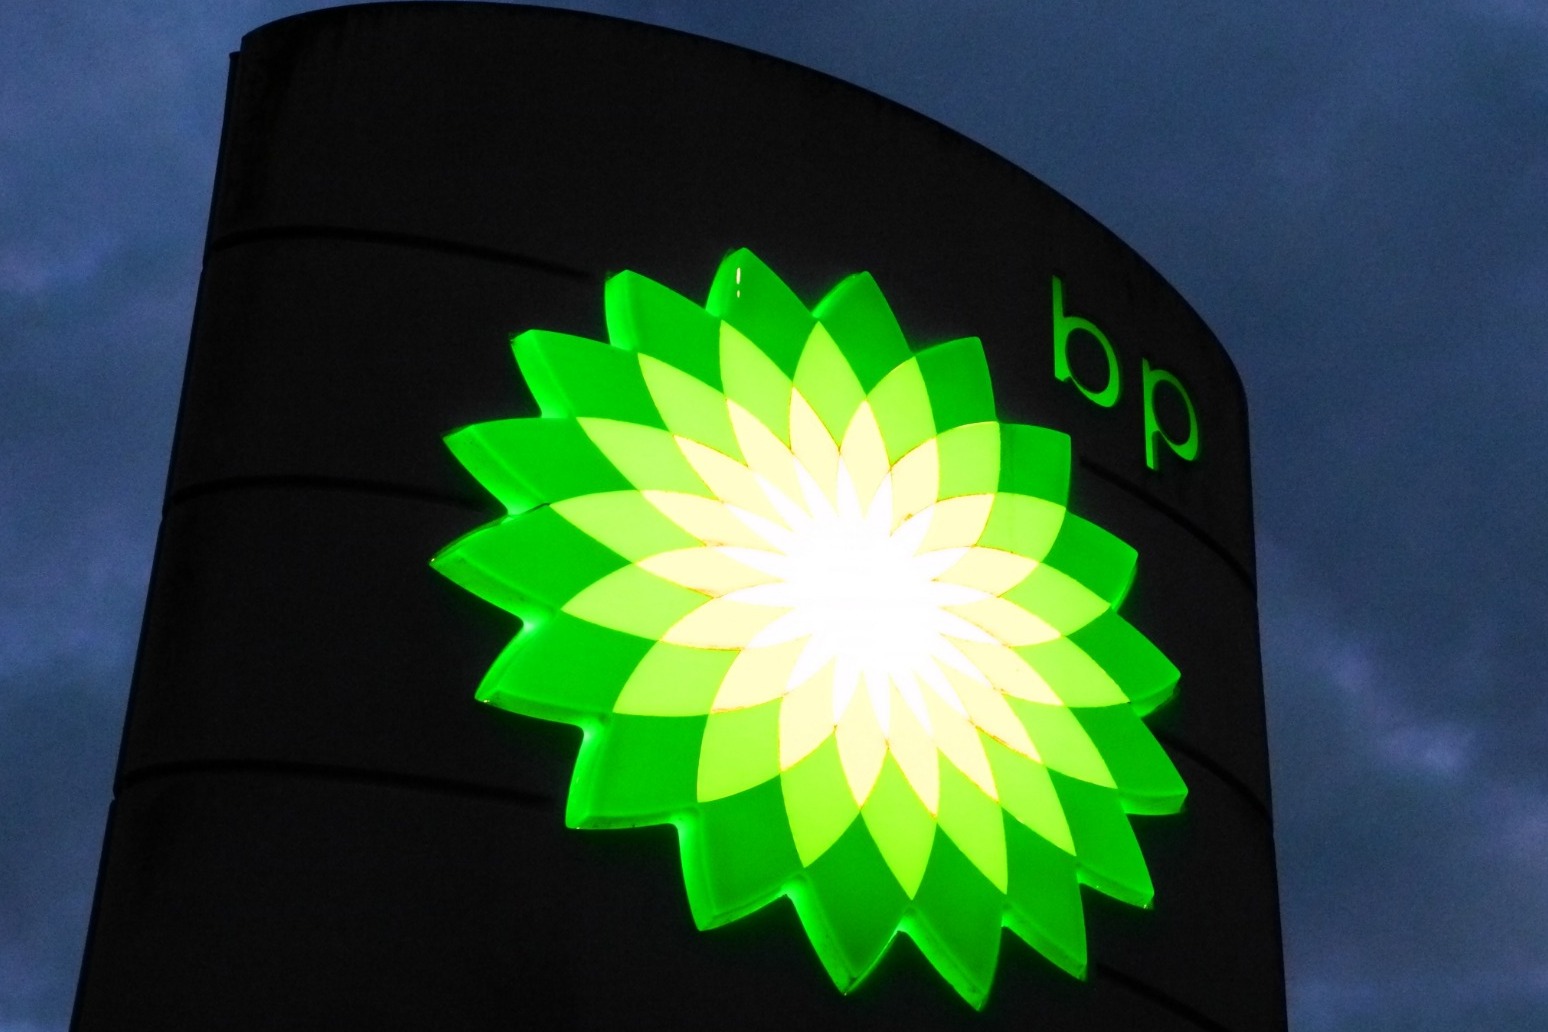 BP profits soar to £23bn after spike in oil and gas prices 